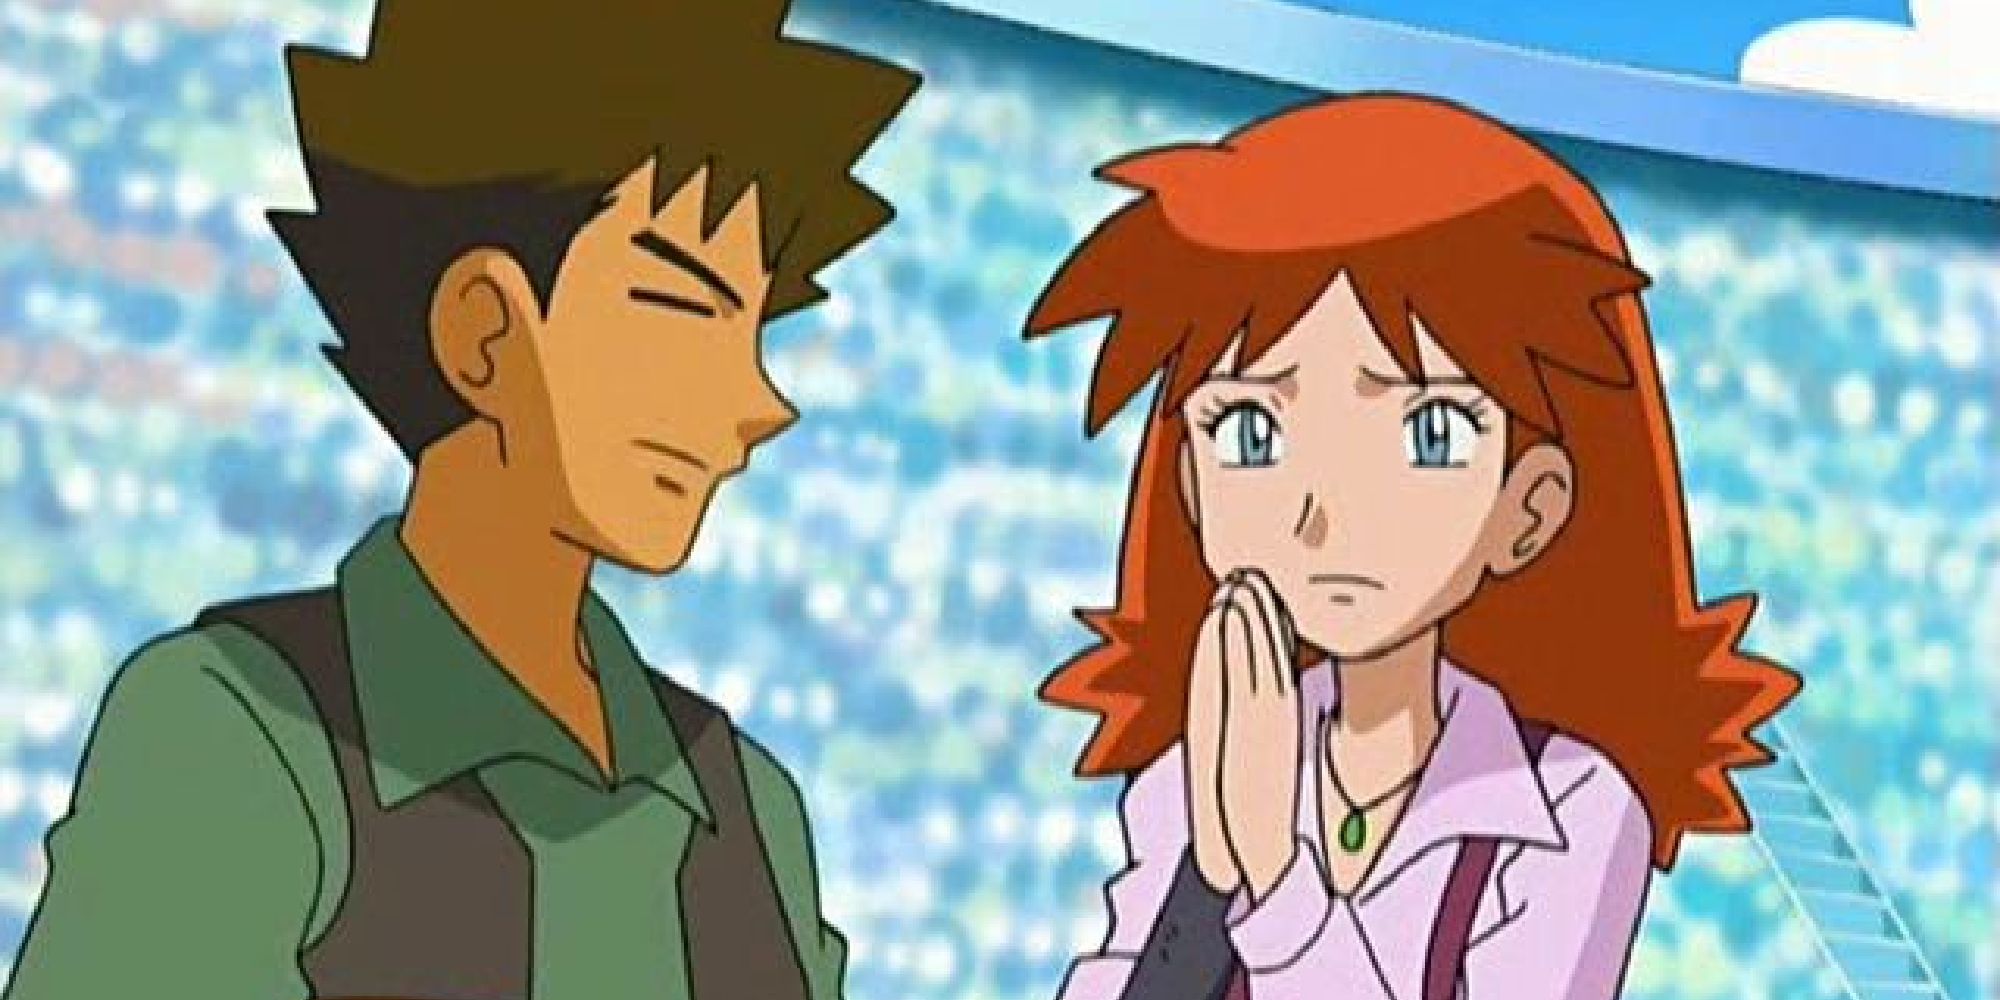 Brock standing with his team battle partner Holly, who looks anxious